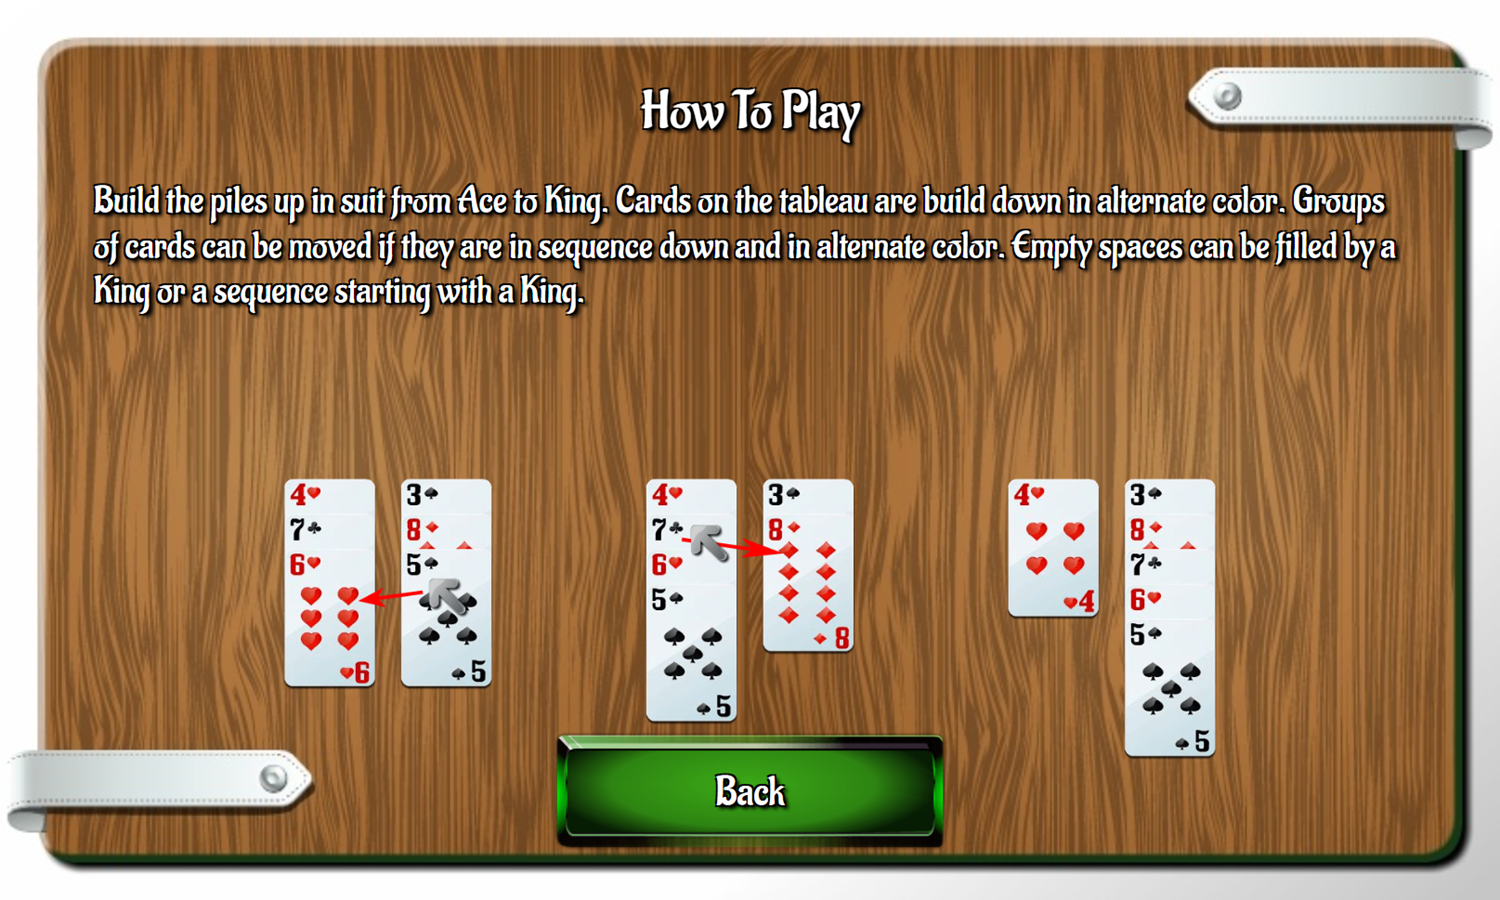 Freecell Duplex Game How To Play Screenshot.